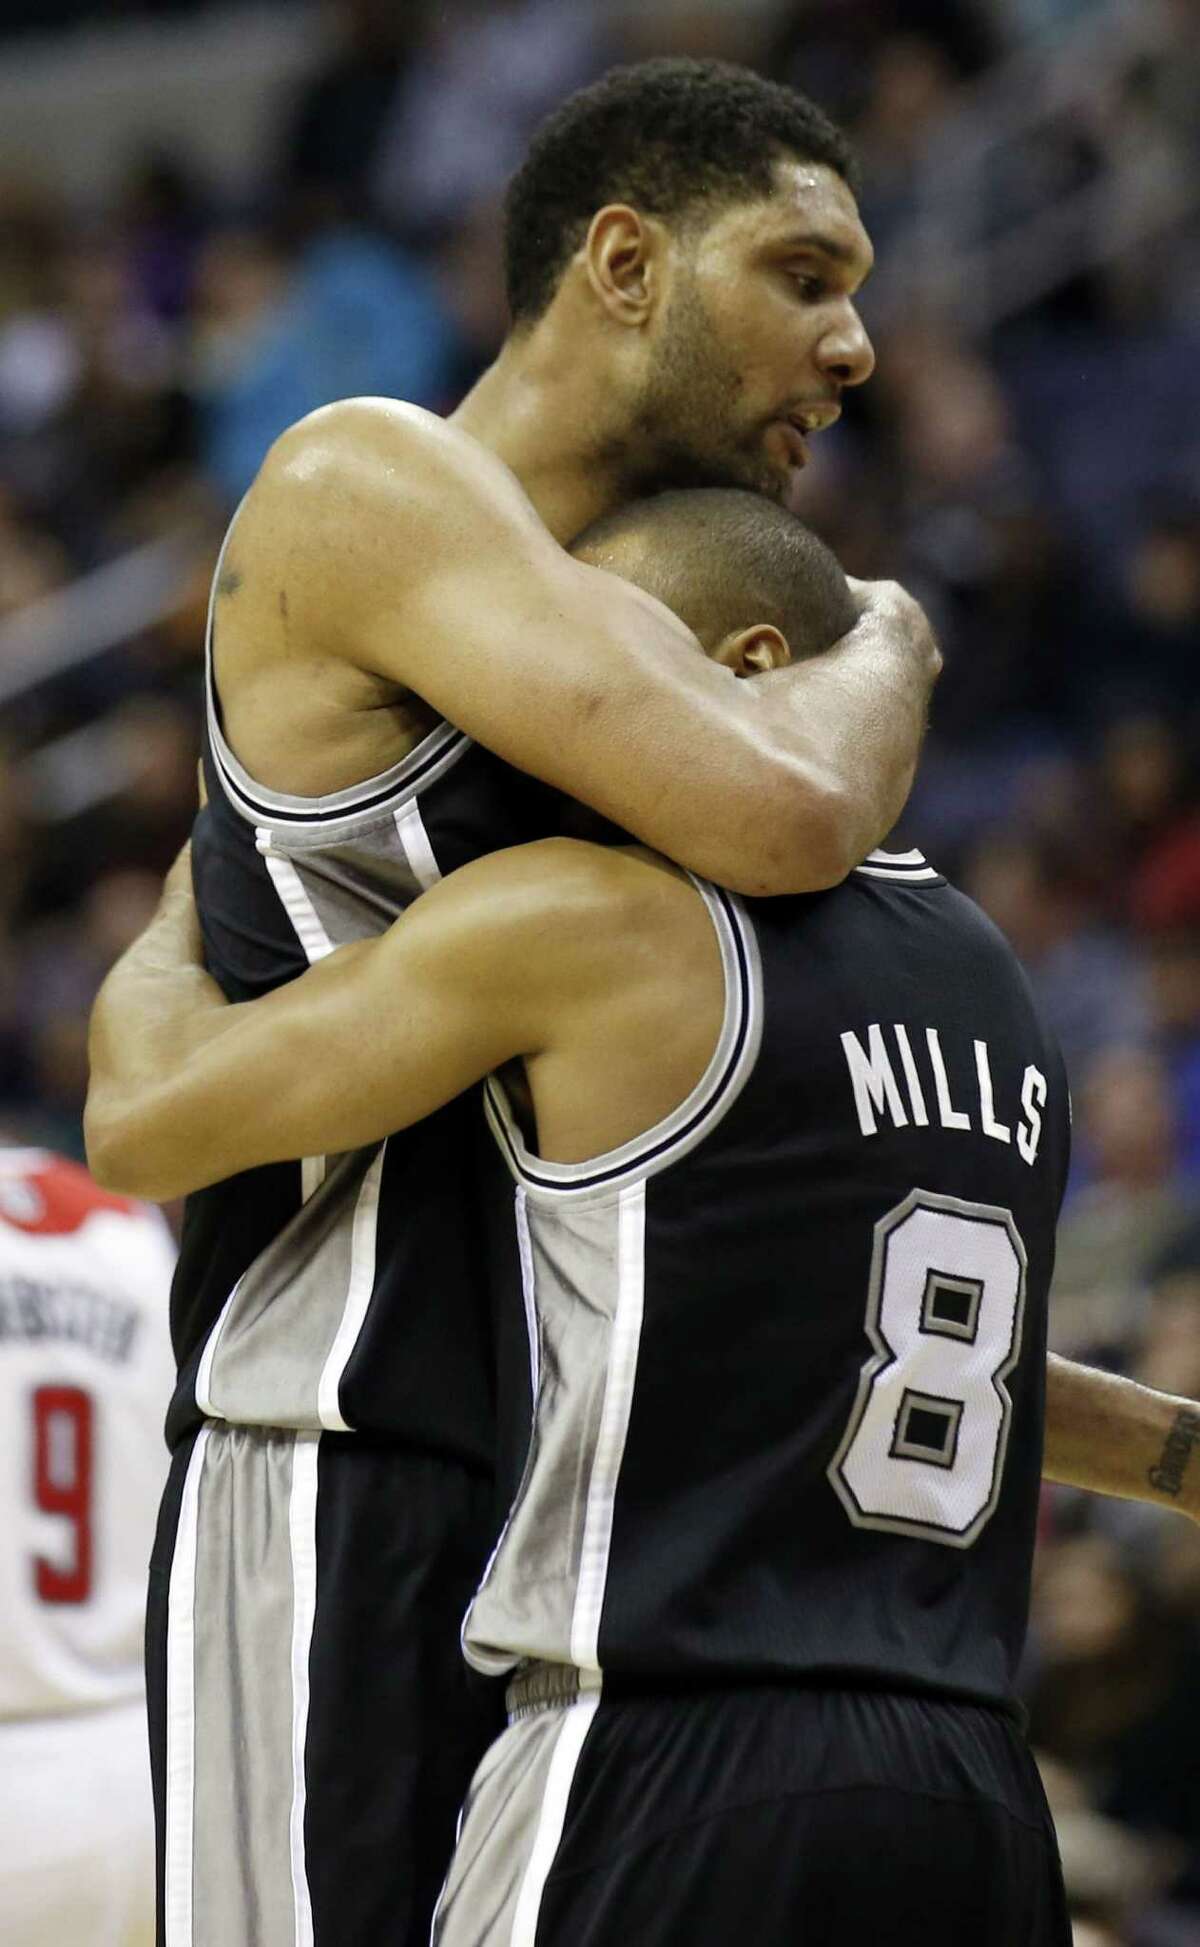 San Antonio Spurs forward Tim Duncan, top, embraces guard Patty Mills (8), from Australia, during a timeout in the first overtime of an NBA basketball game against the Washington Wizards, Wednesday, Feb. 5, 2014, in Washington. Duncan had 31 points and Mills had 23 in their 125-118 double overtime win. (AP Photo/Alex Brandon)